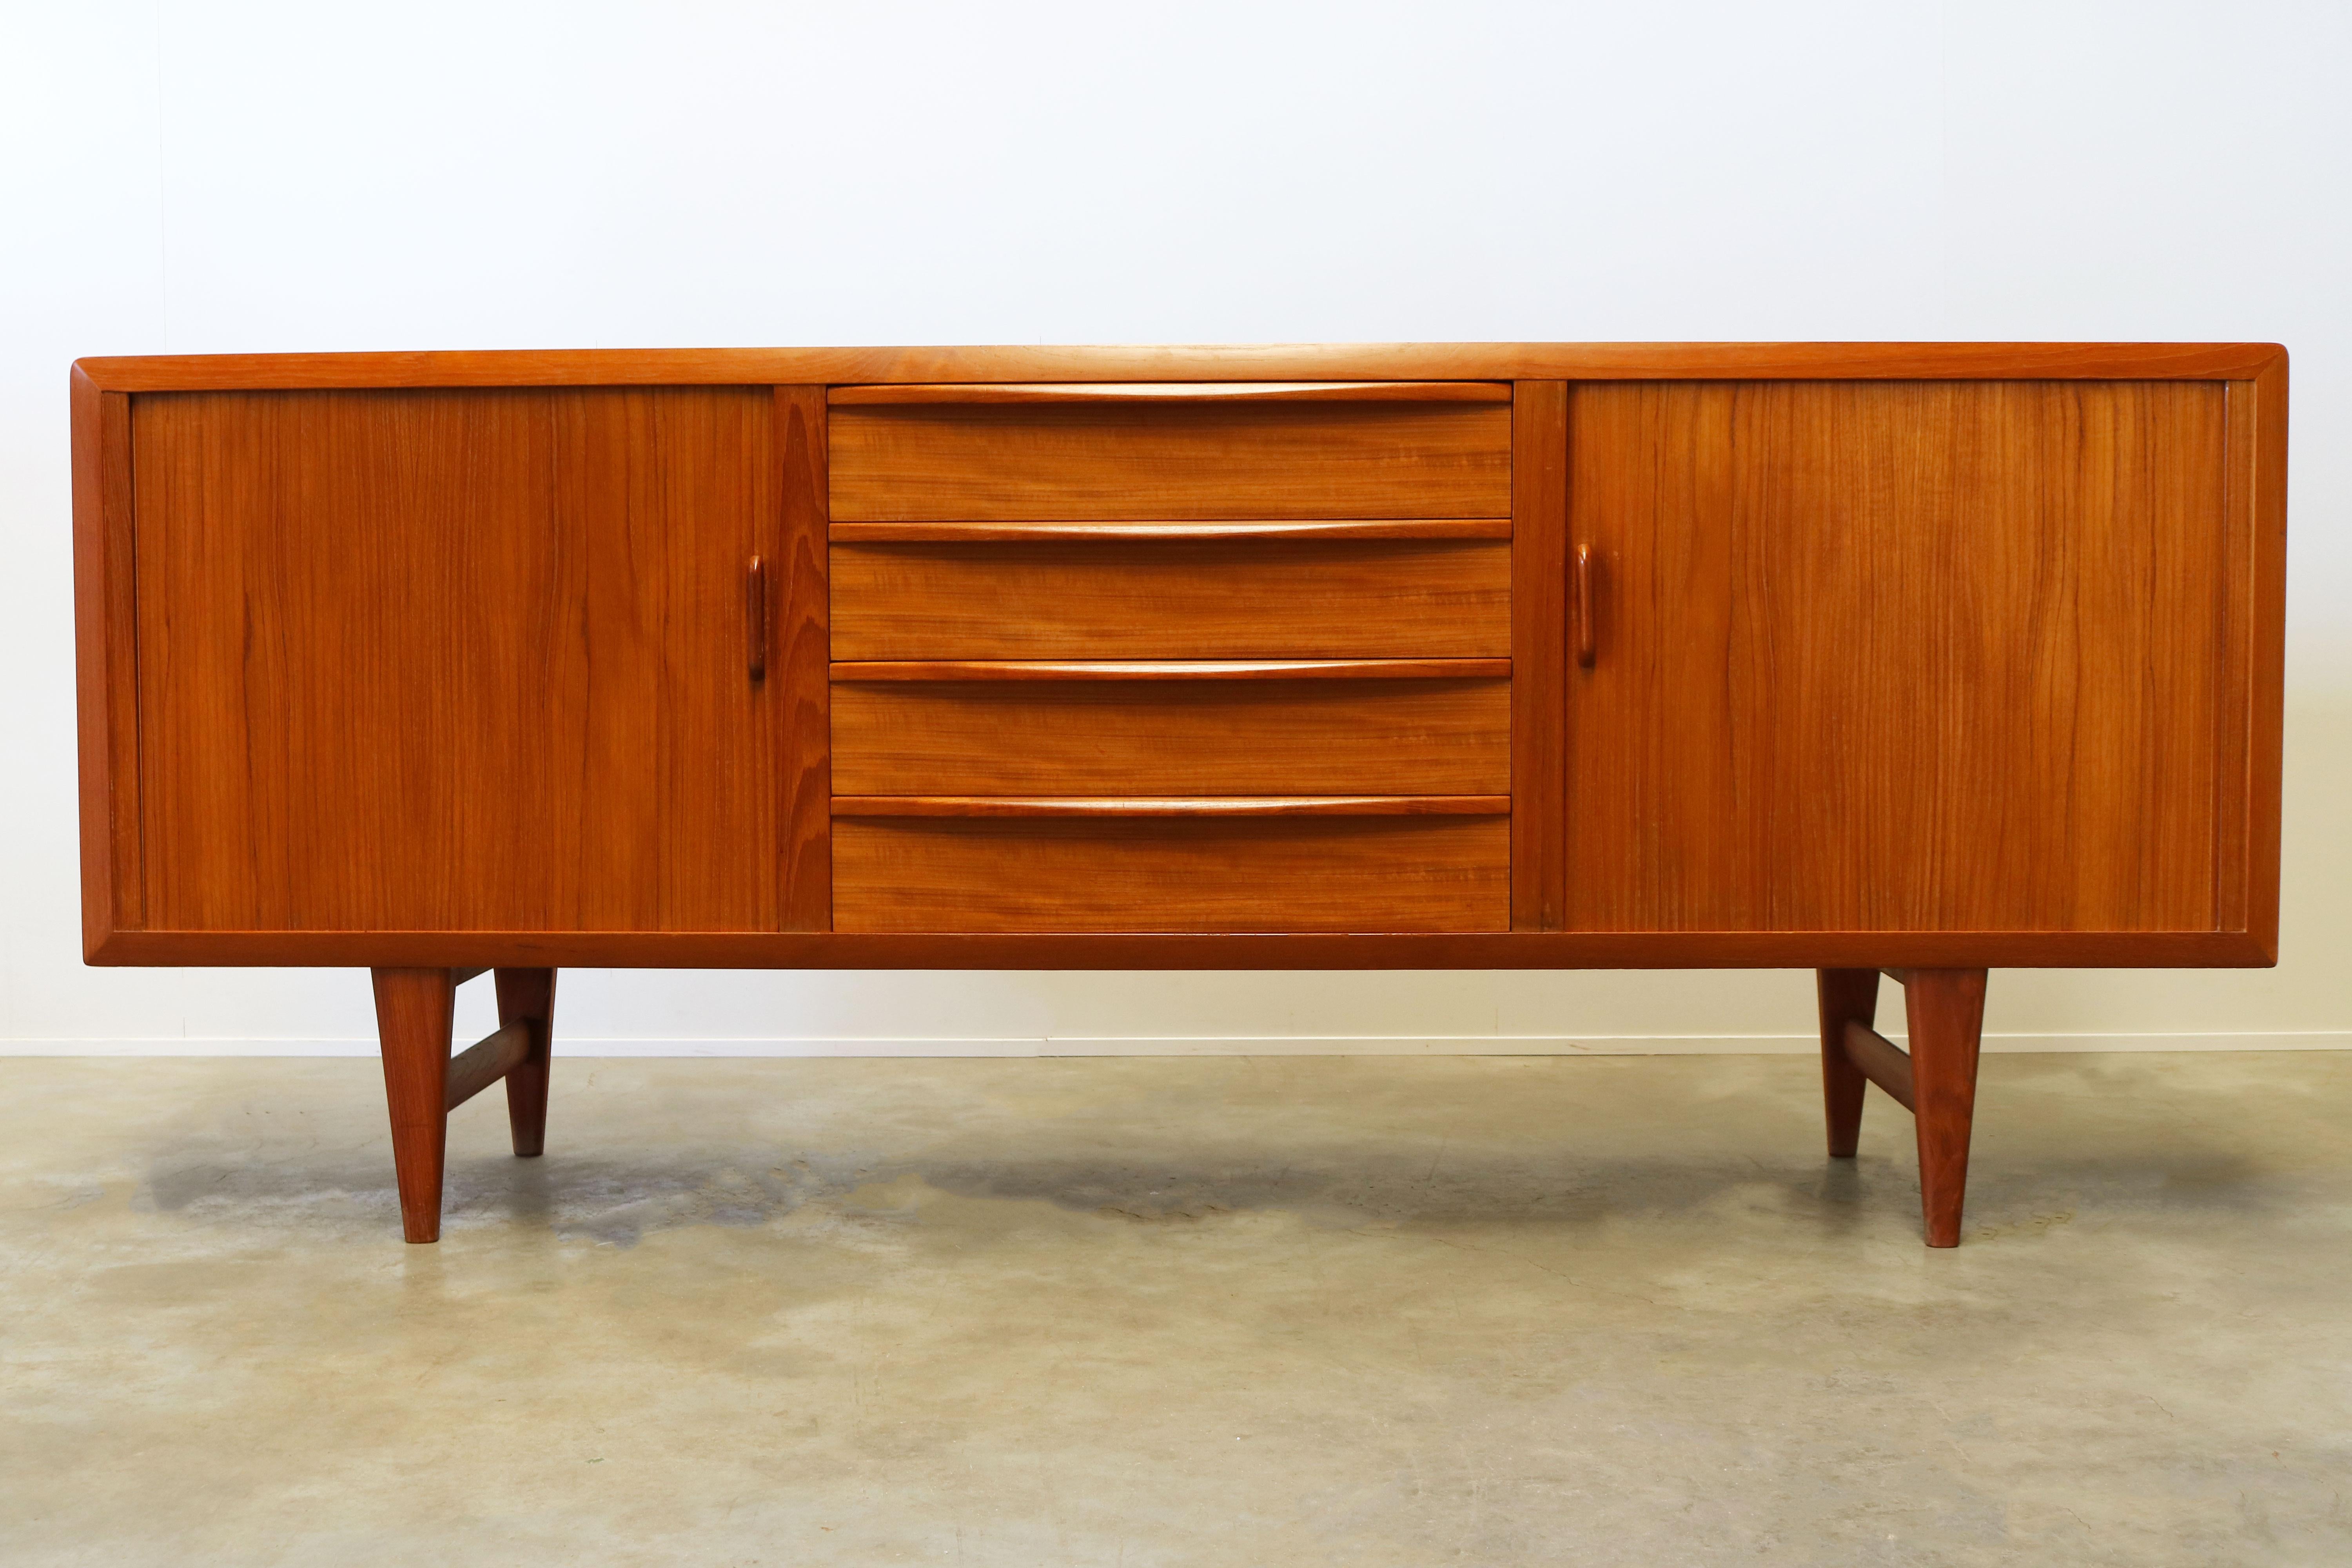 Magnificent and rare Danish design sideboard designed by: Ib Kofod-Larsen for the Faarup Mobelfabrik in the 1950s. An exceptional beautiful sideboard with organic lines and warm teak wood. The sideboard has four drawers and two tambour doors who